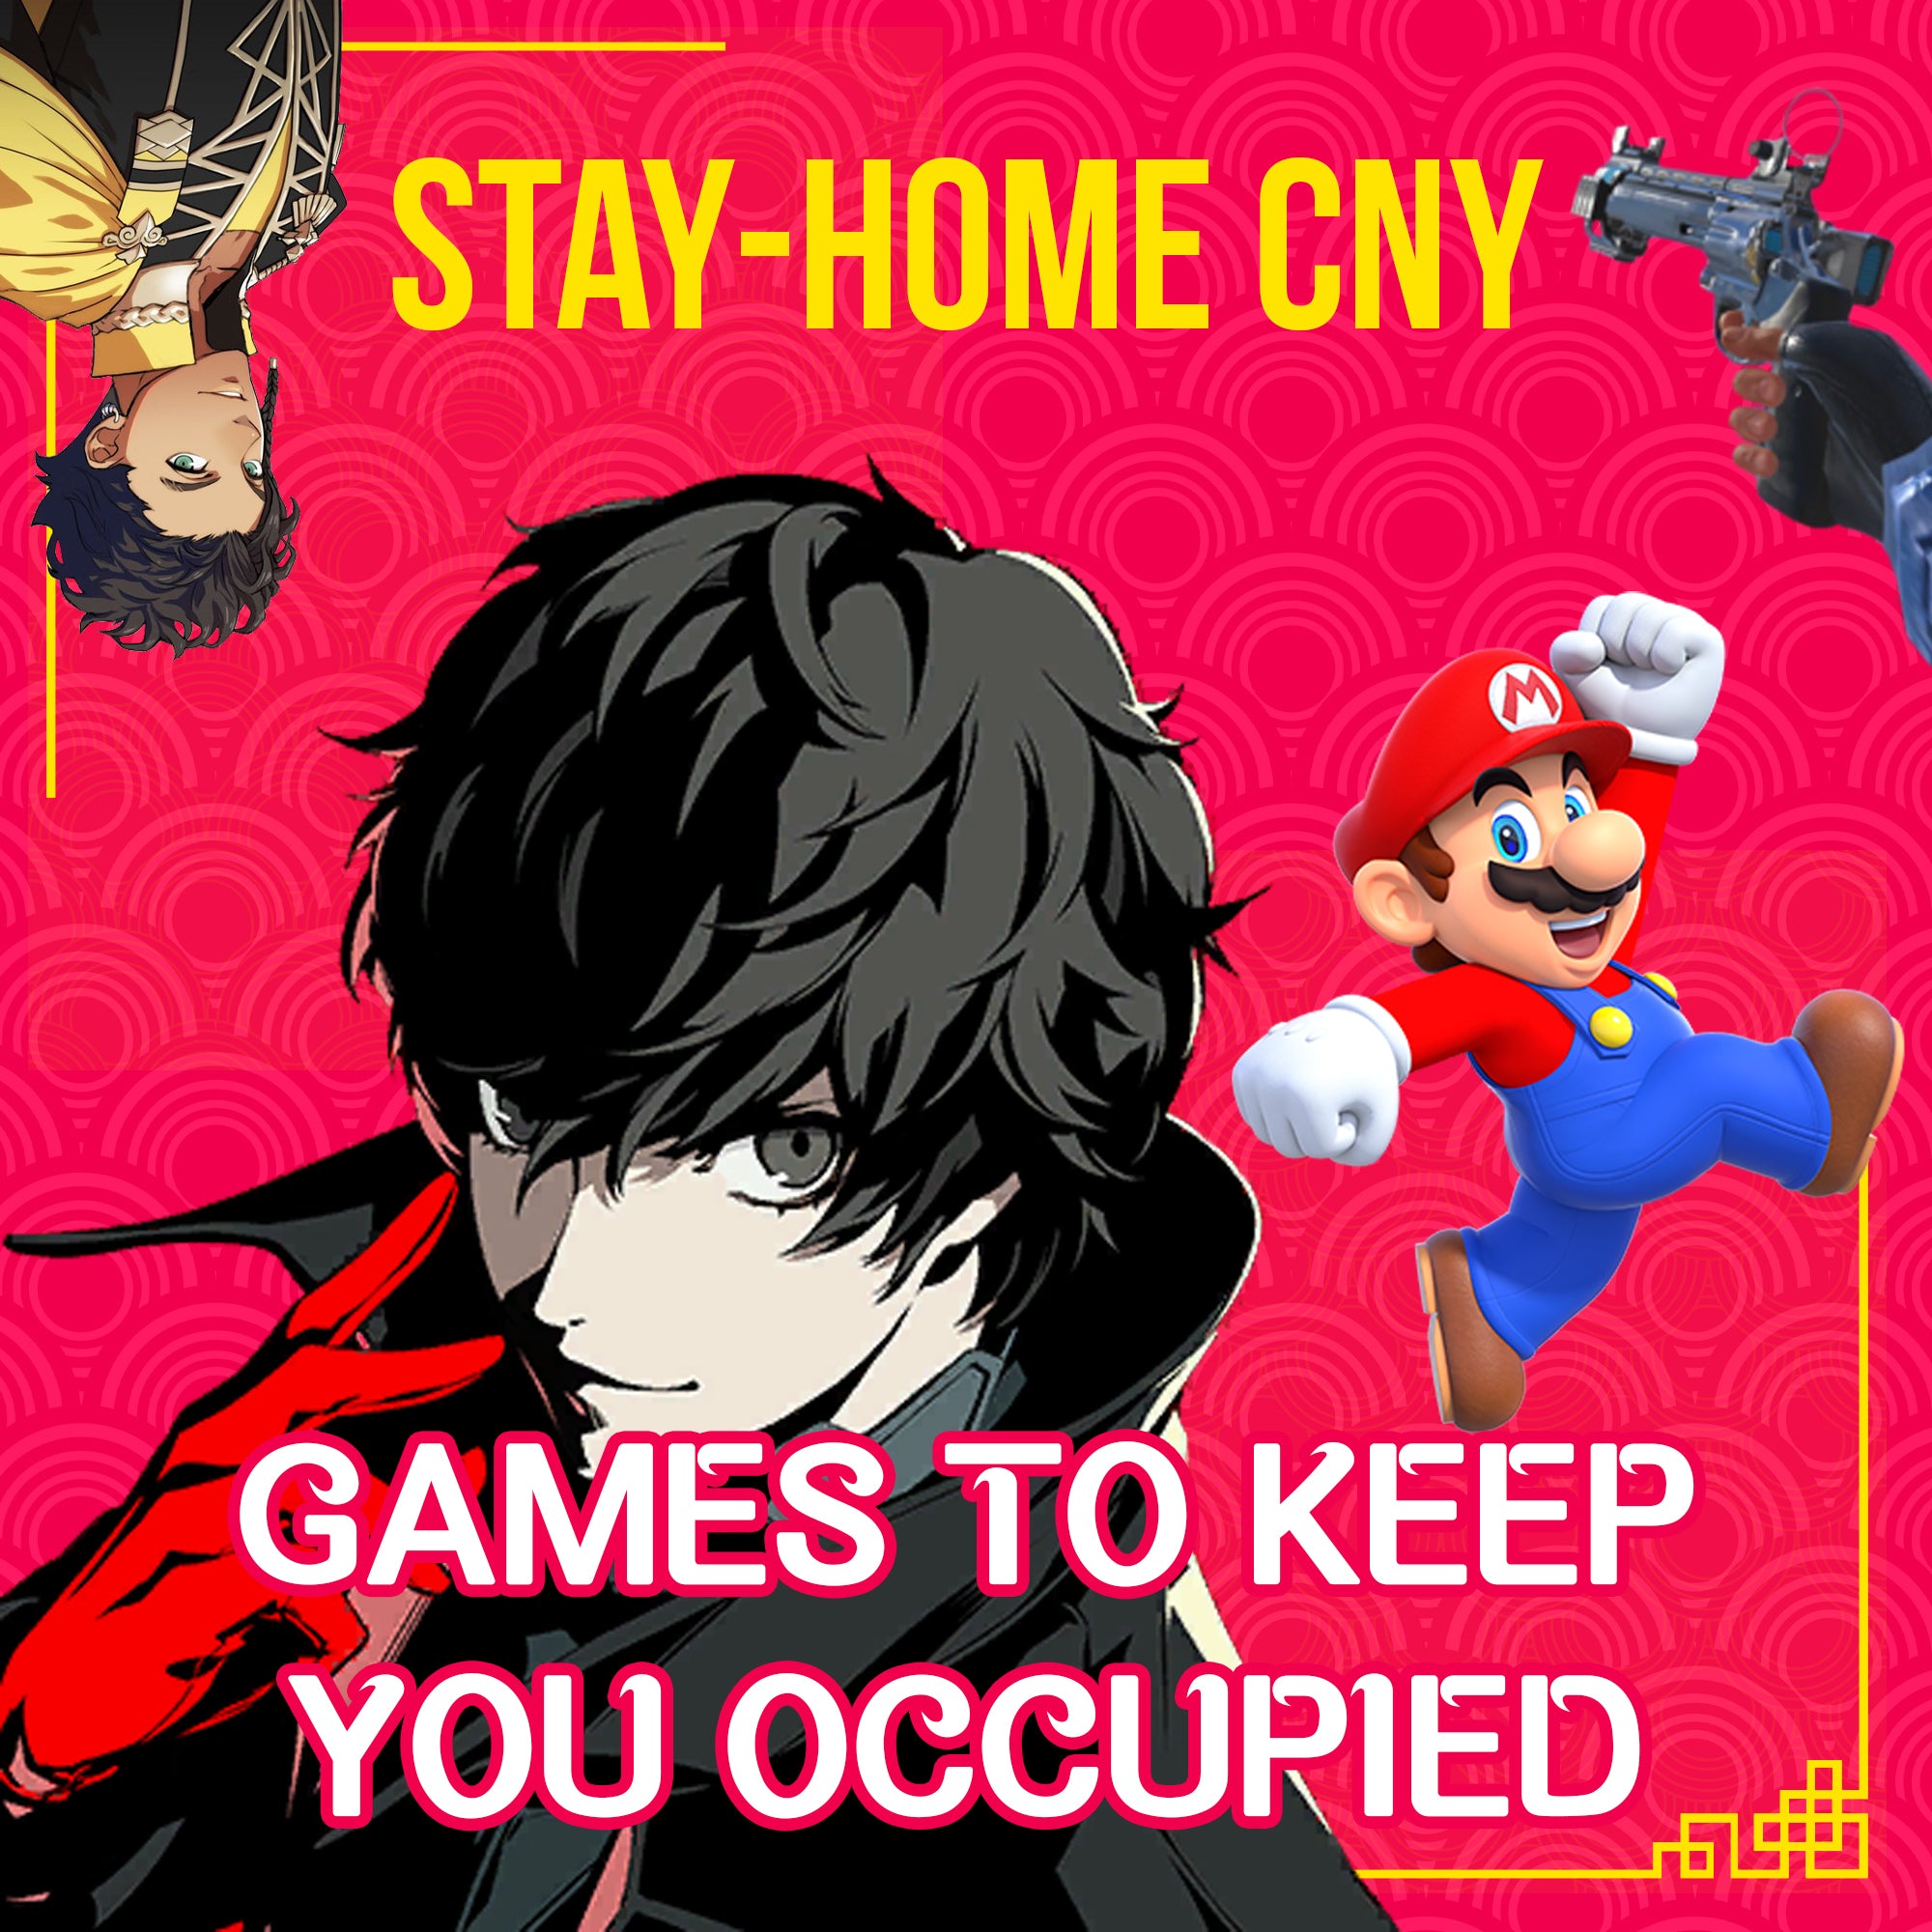 Stay-Home CNY - Games to Keep You Occupied